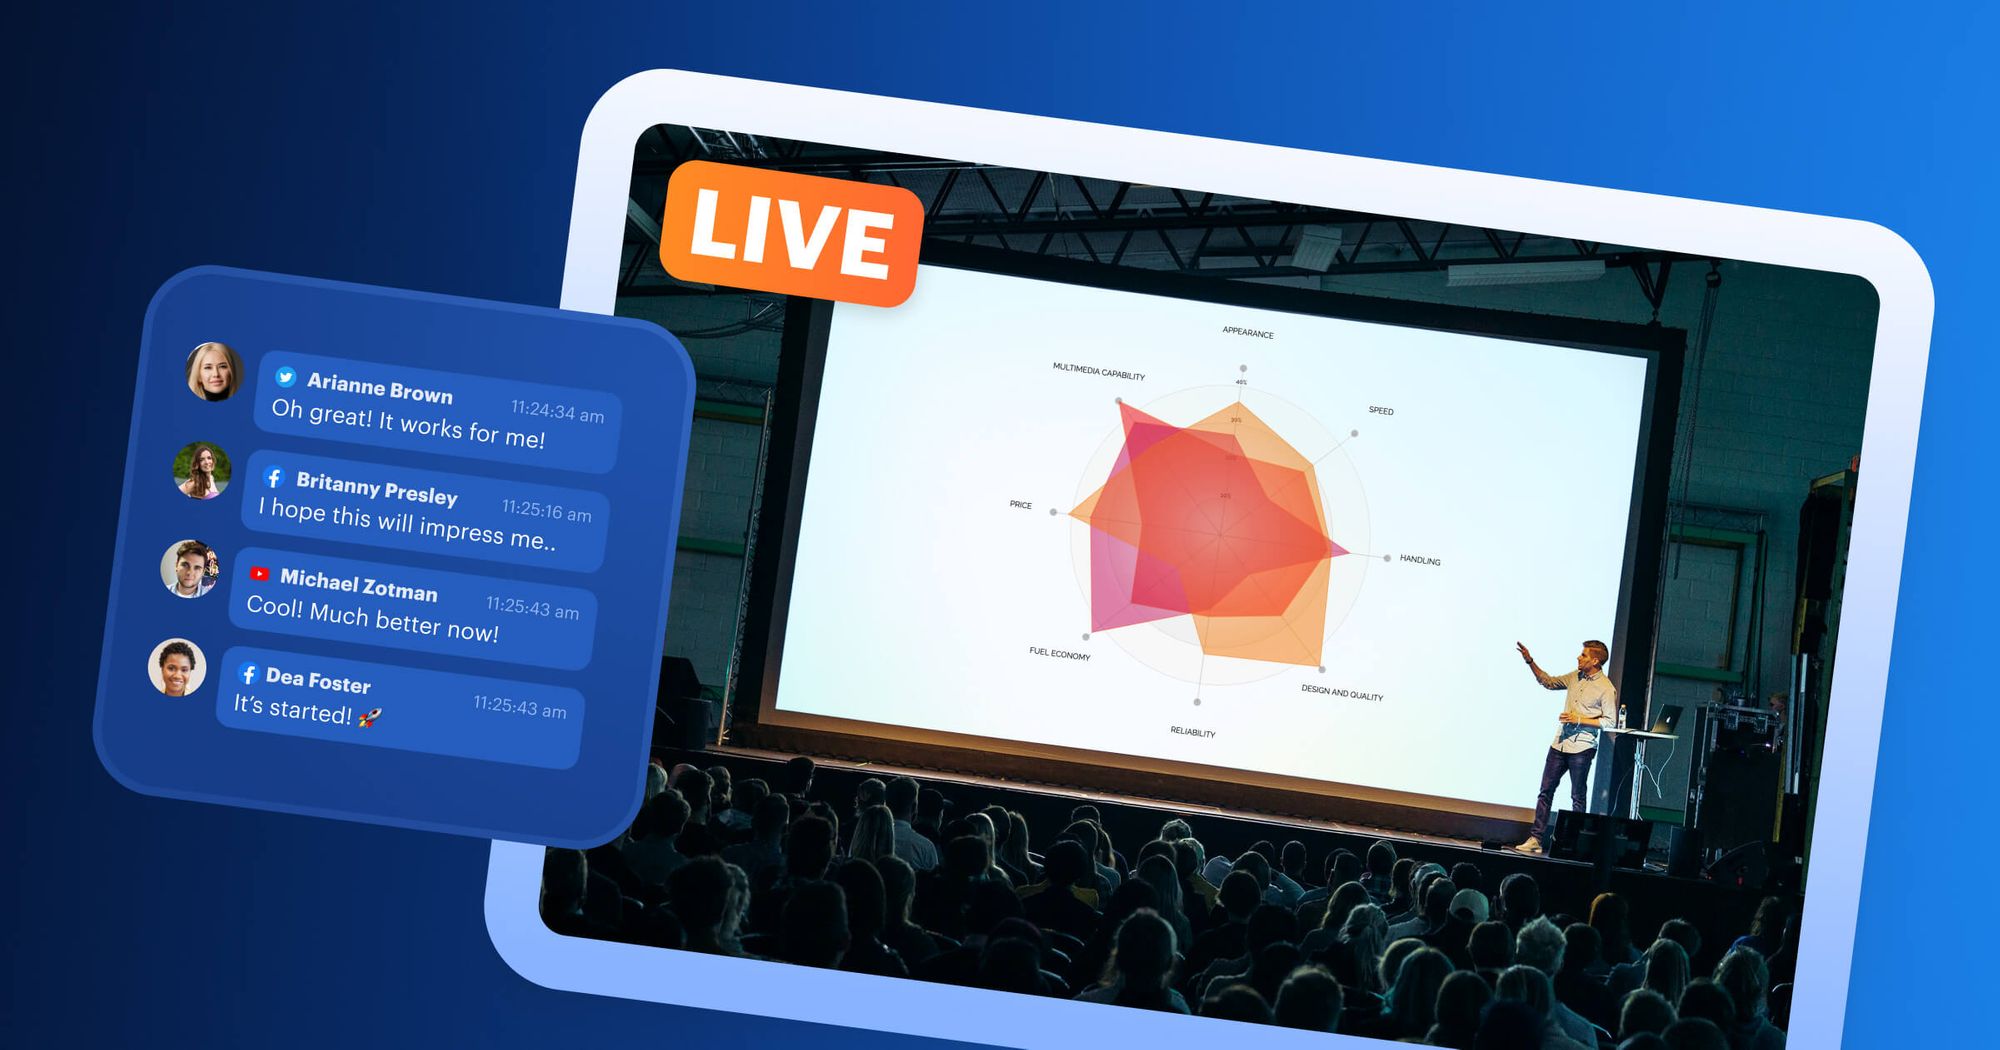 How to live stream an event: increasing your reach and impact